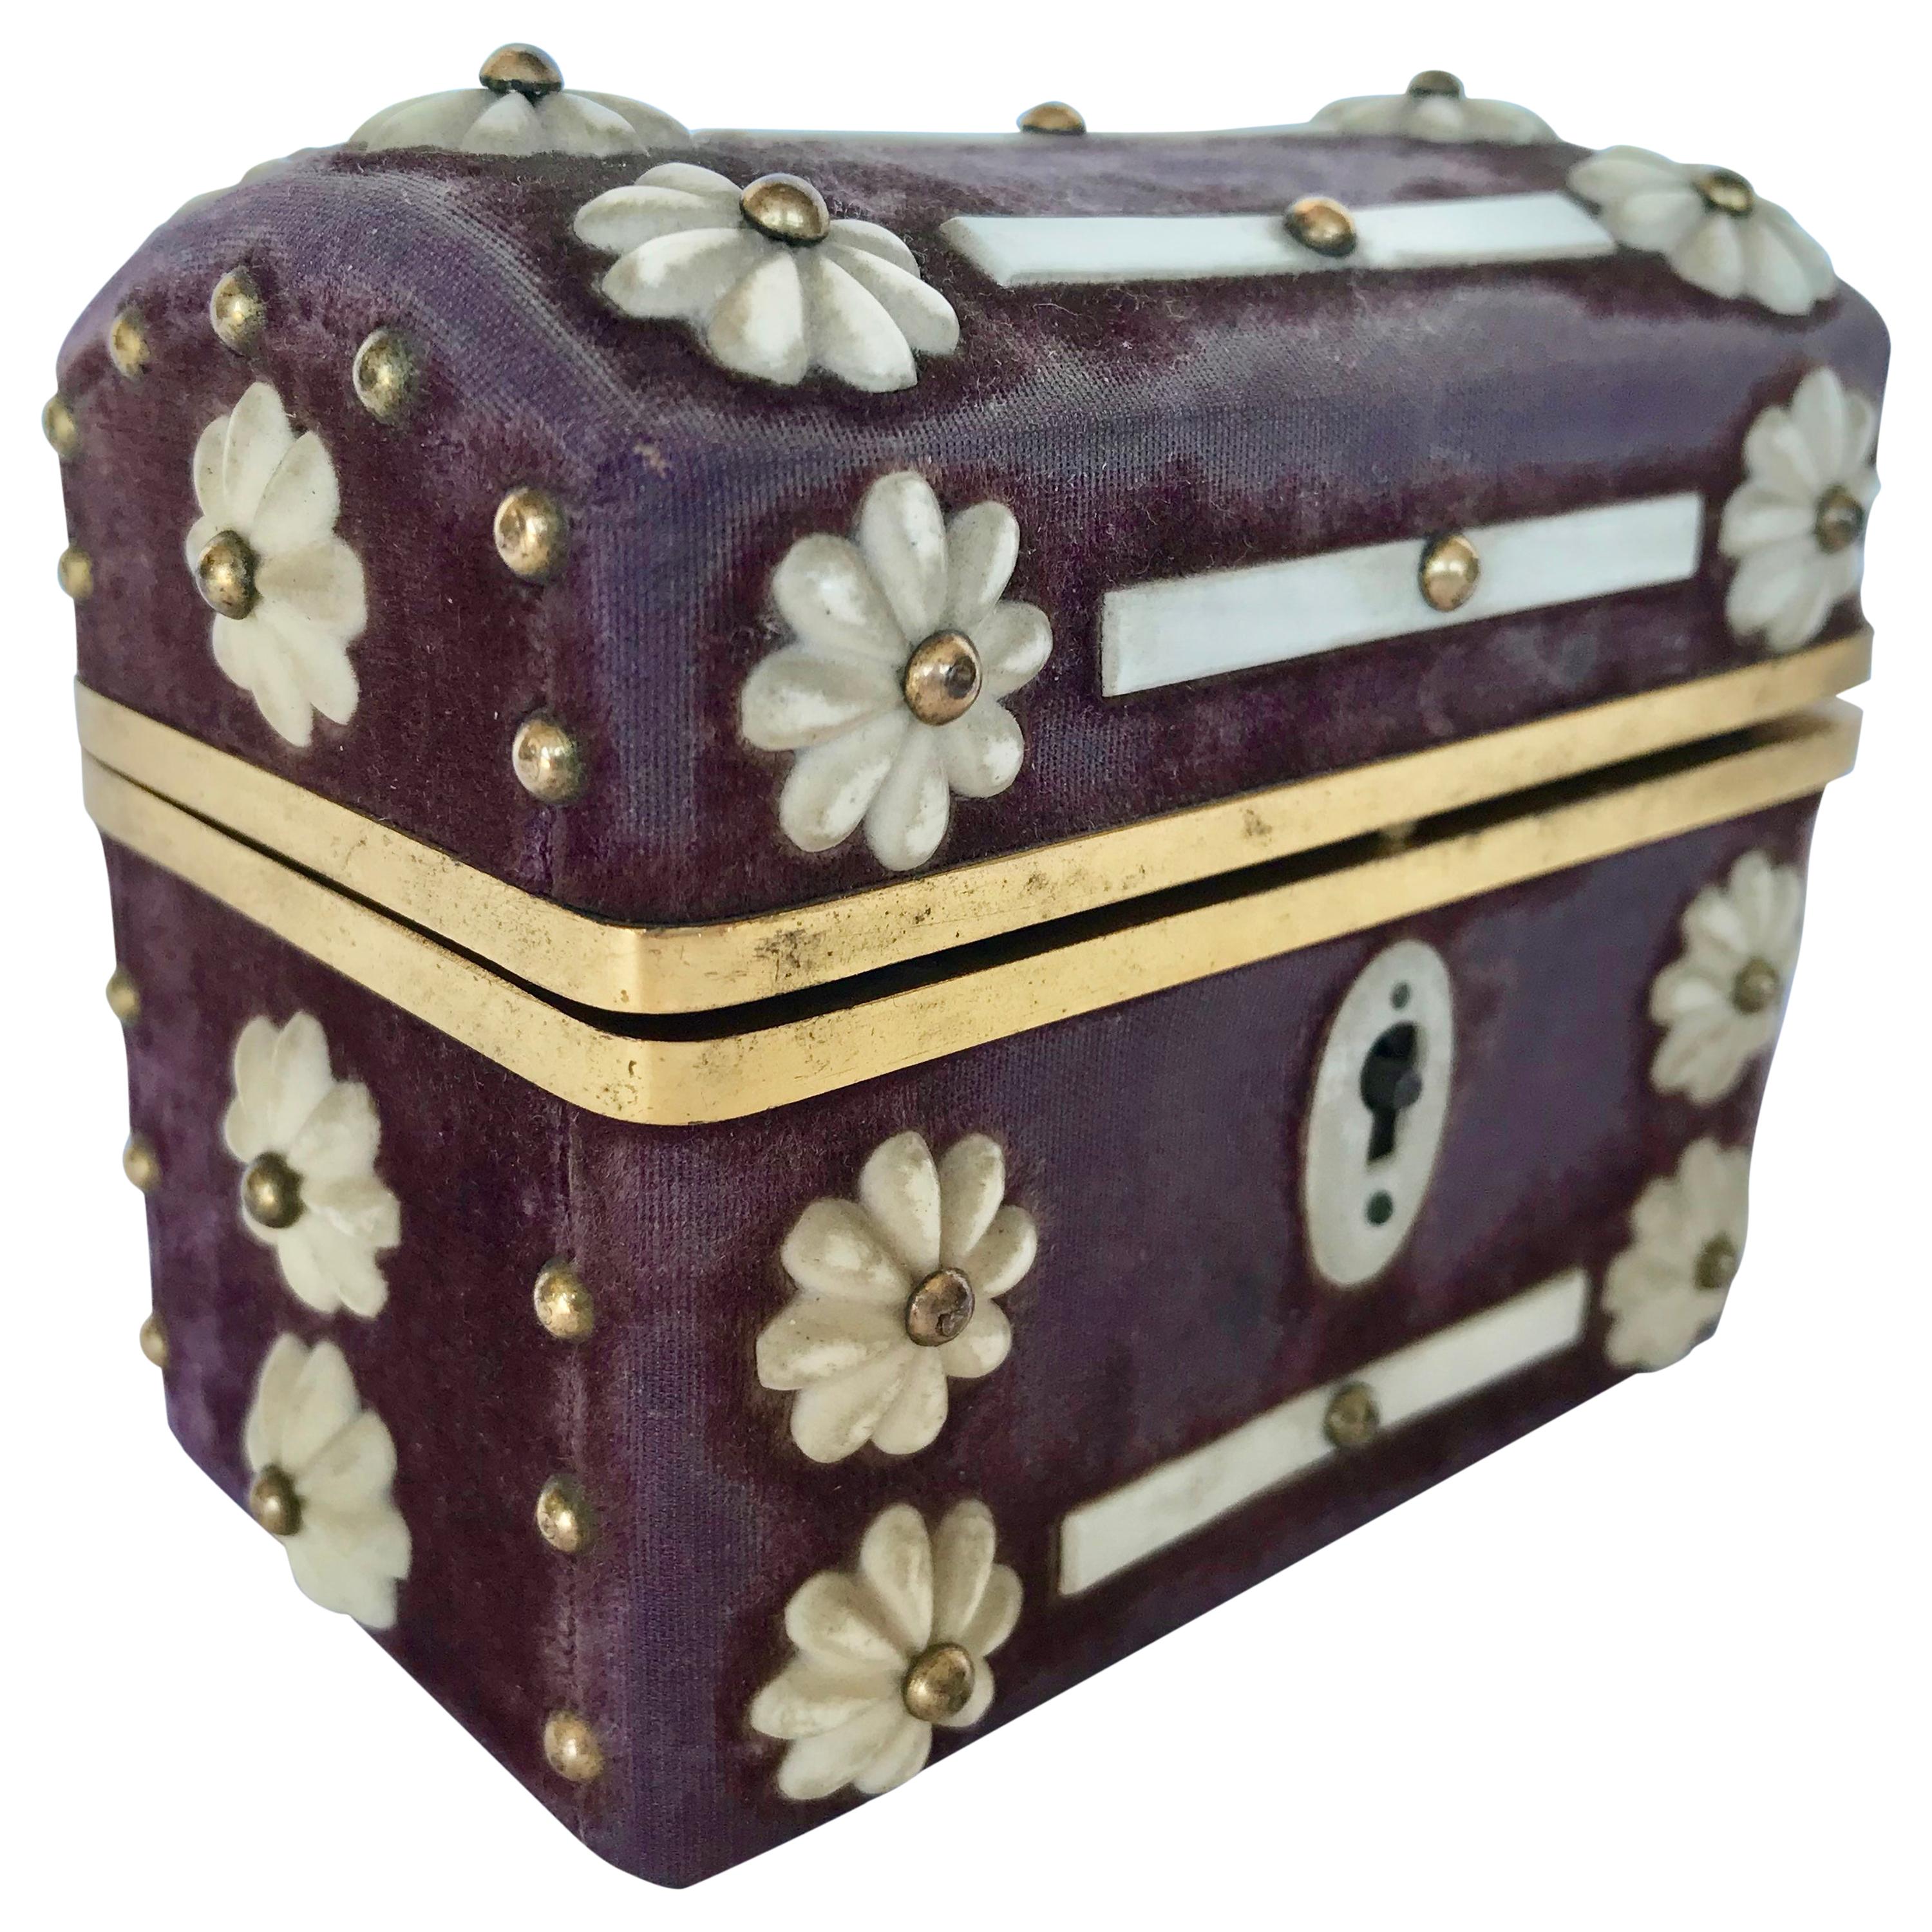 19th Century English Dore' Mounted Travel Casket with 2 Scent Bottles